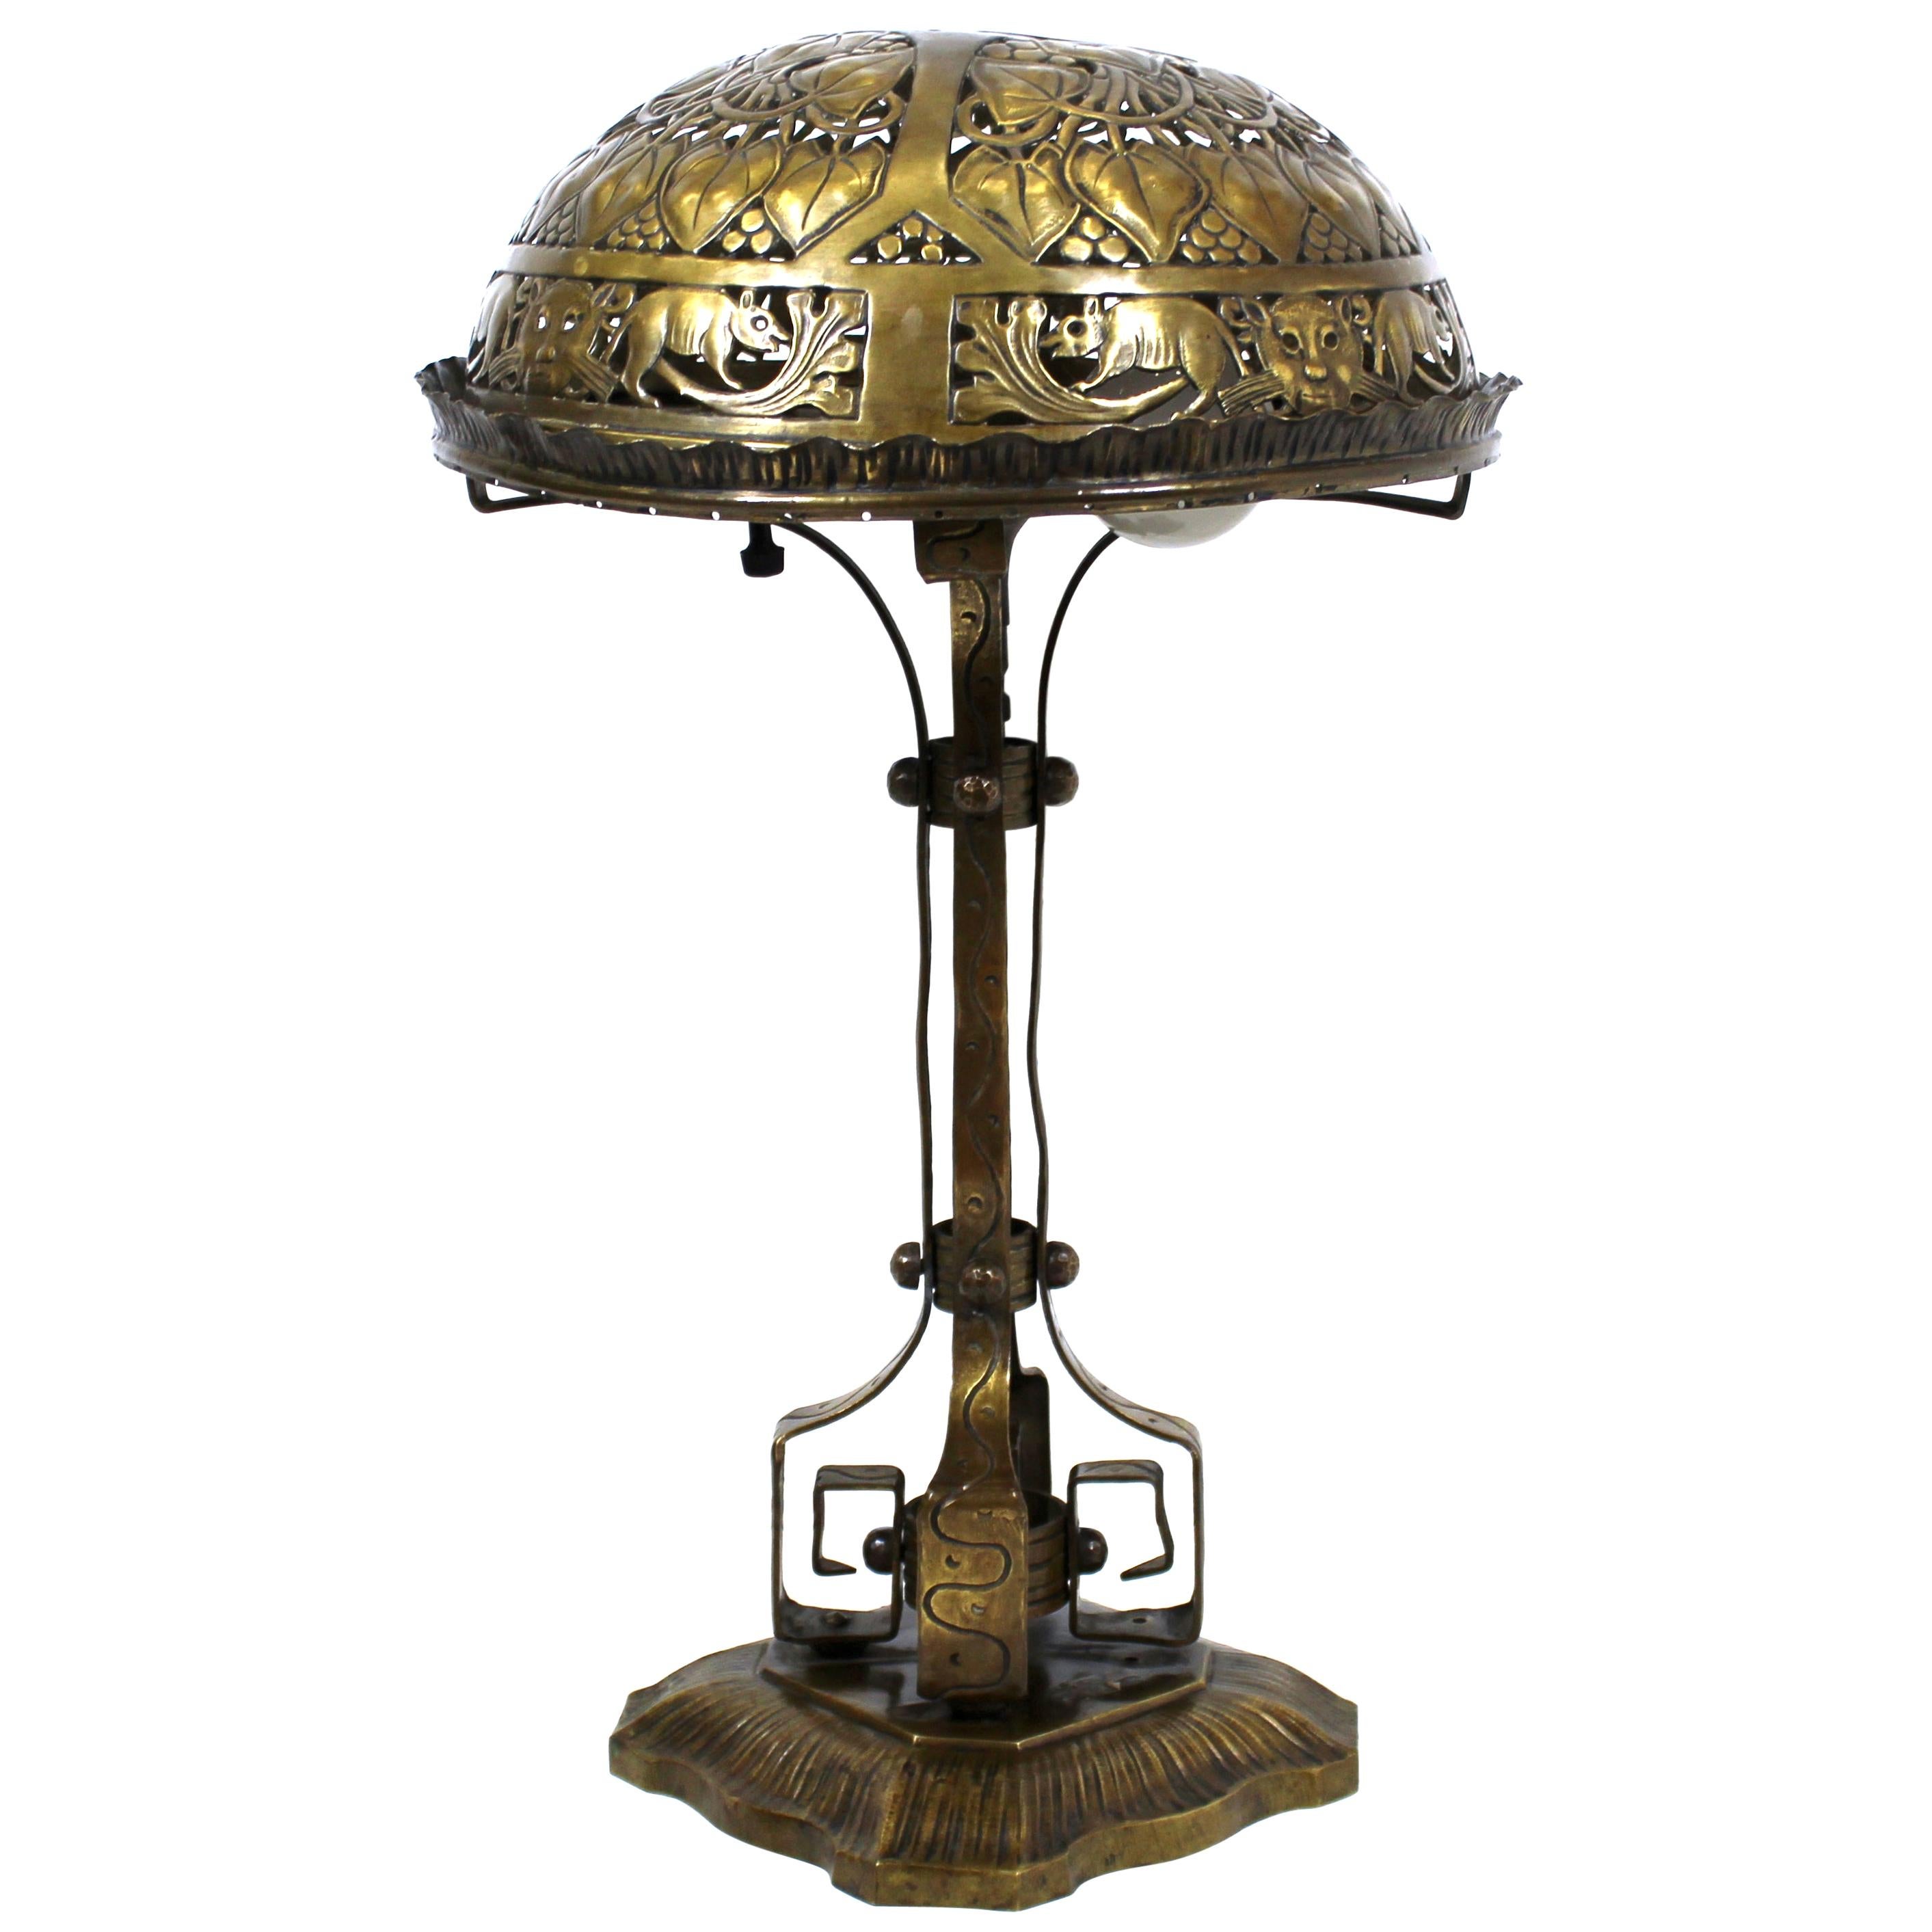 German Jugendstil Repousse Brass and Bronze Table Lamp Attributed to Oscar Bach